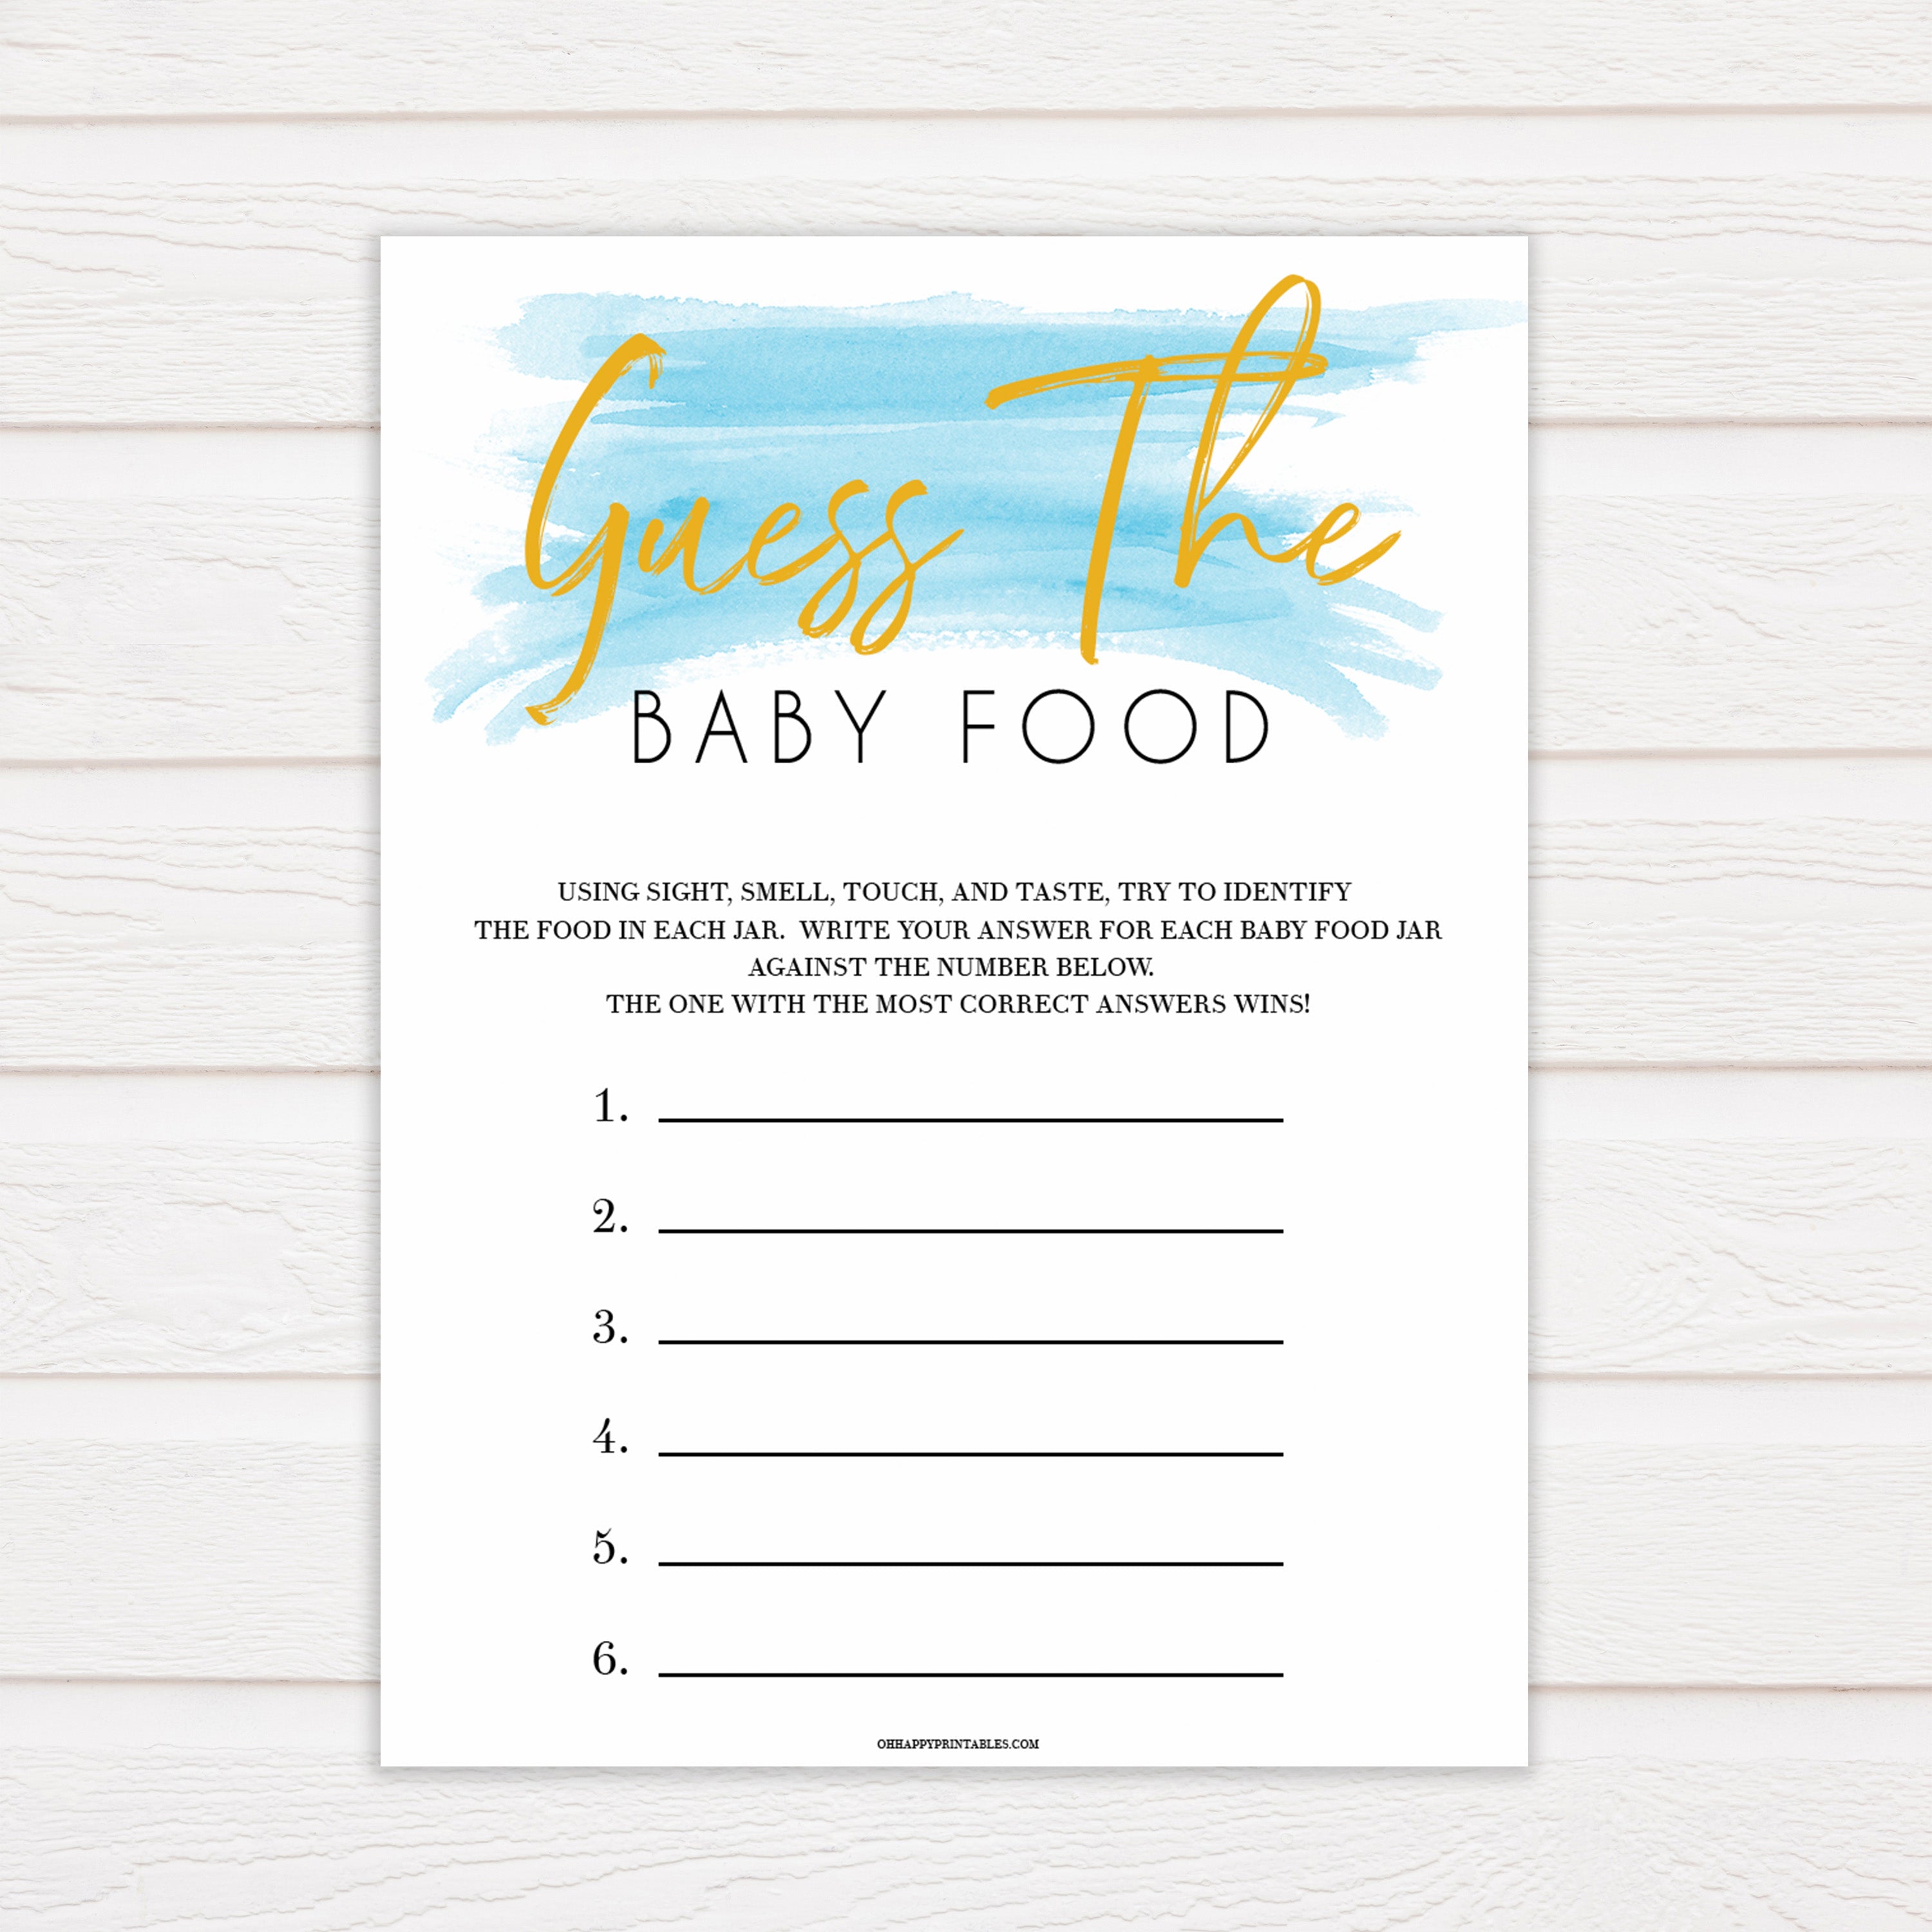 Blue swash, guess the baby food baby games, baby shower games, printable baby games, fun baby games, boy baby shower games, baby games, fun baby shower ideas, baby shower ideas, boy baby games, blue baby shower